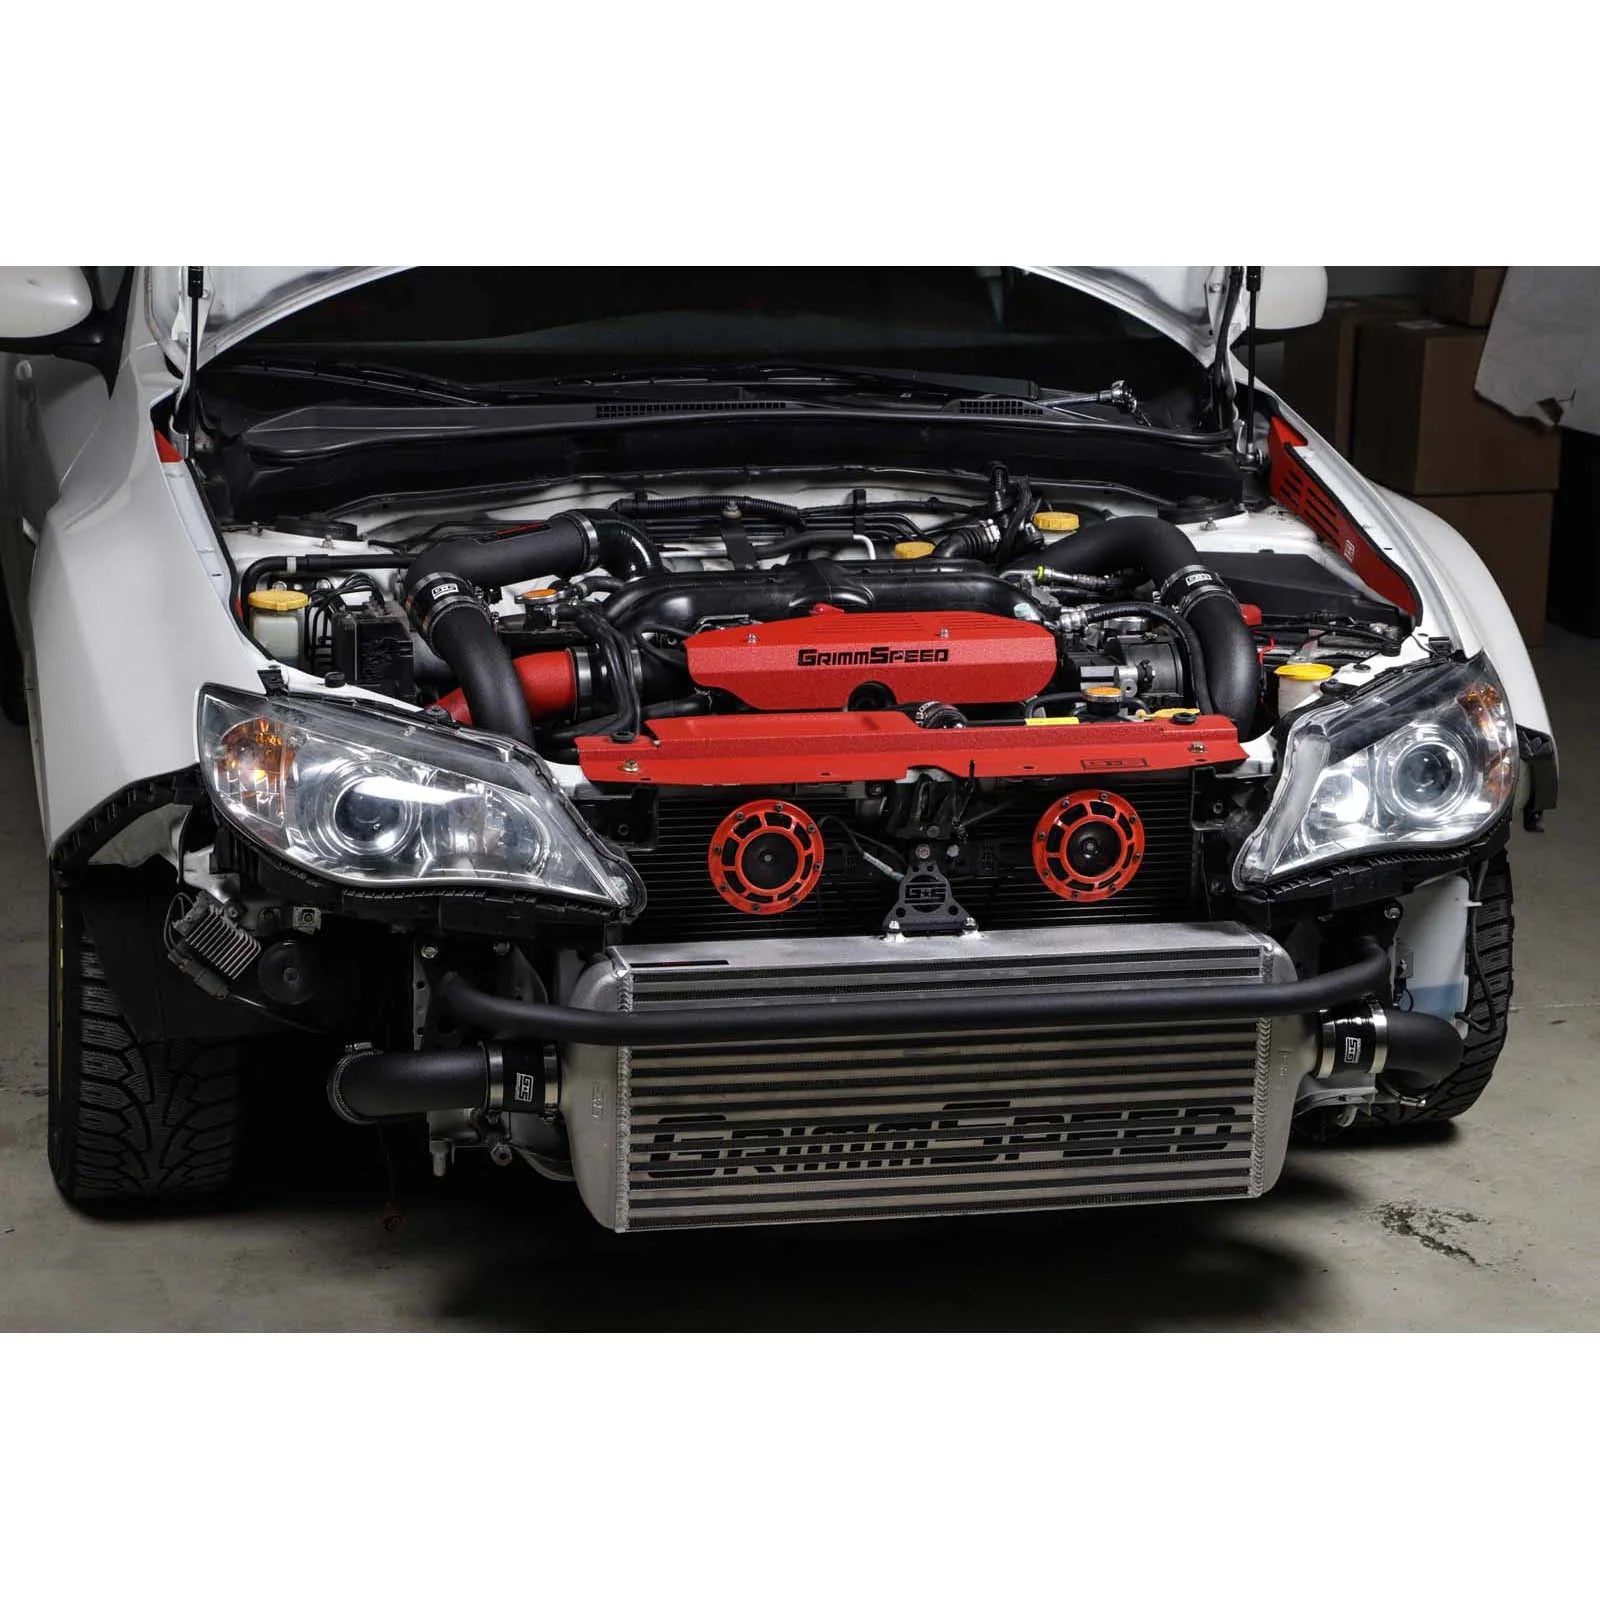 GrimmSpeed Front Mount Intercooler Kit - Raw Core with Black Piping - 2008-14 Subaru WRX